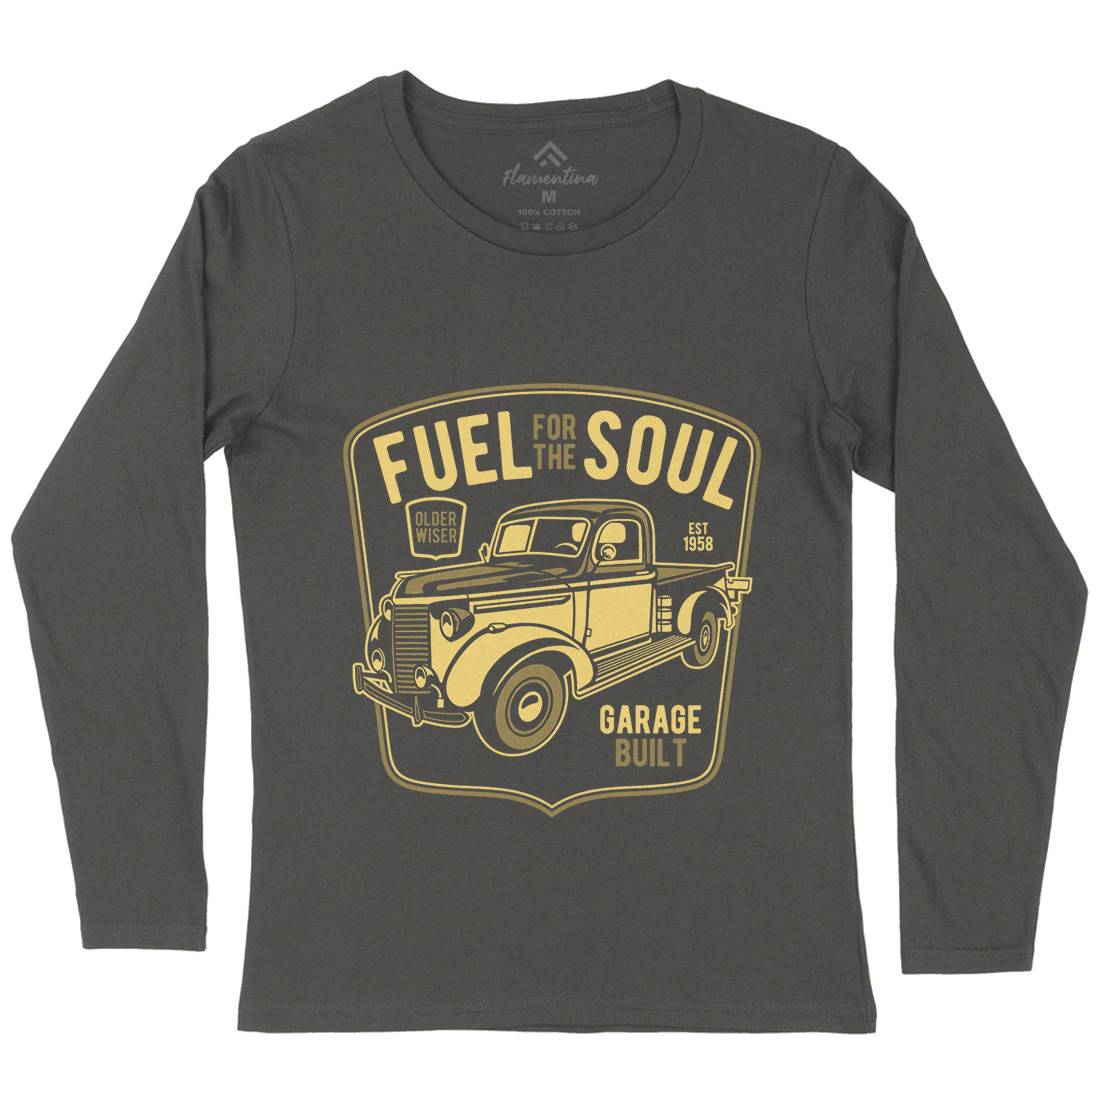 Fuel For The Soul Womens Long Sleeve T-Shirt Cars B213